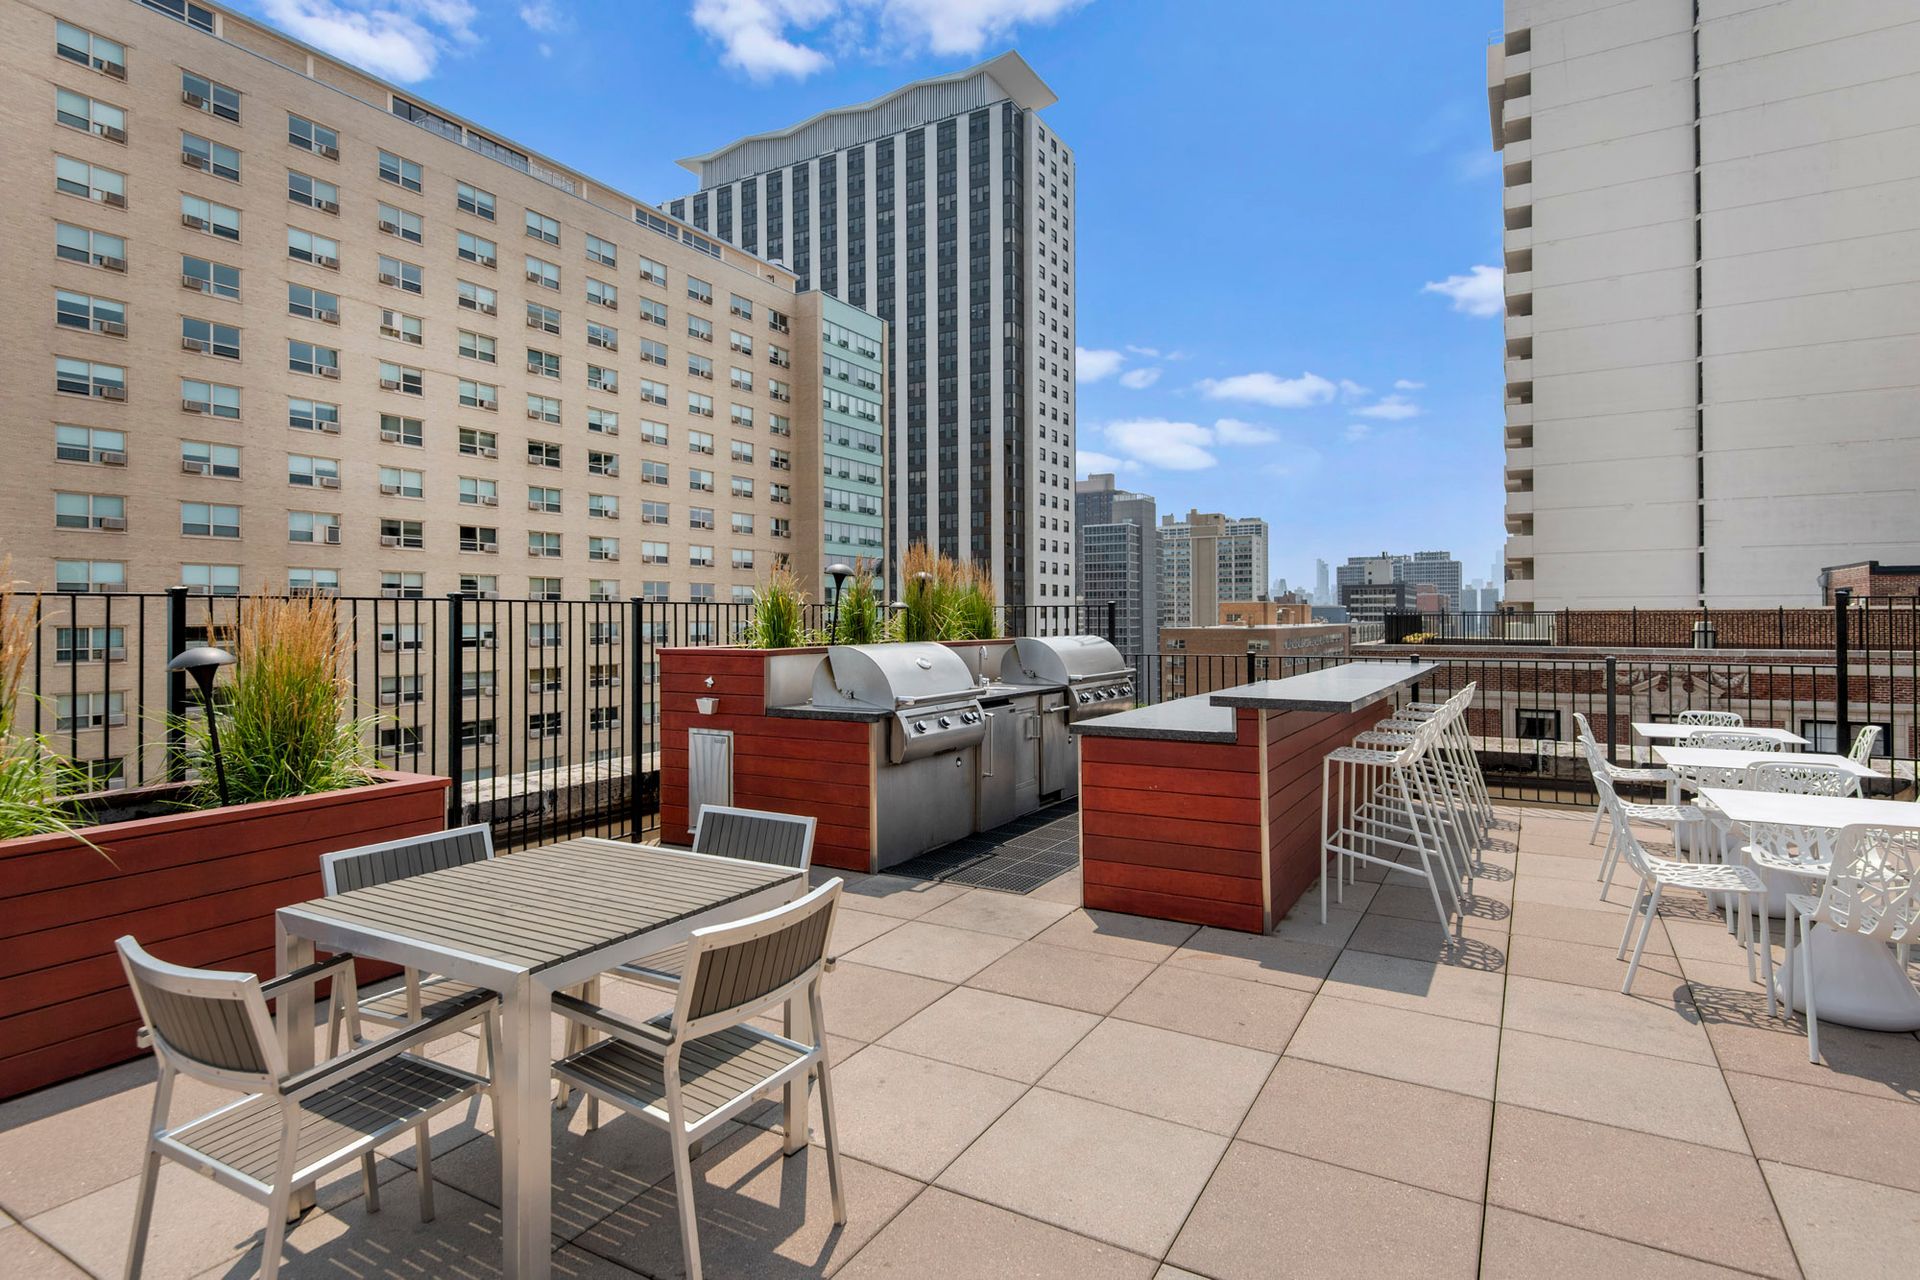 A rooftop patio with tables and chairs and a grill at The Belmont by Reside.